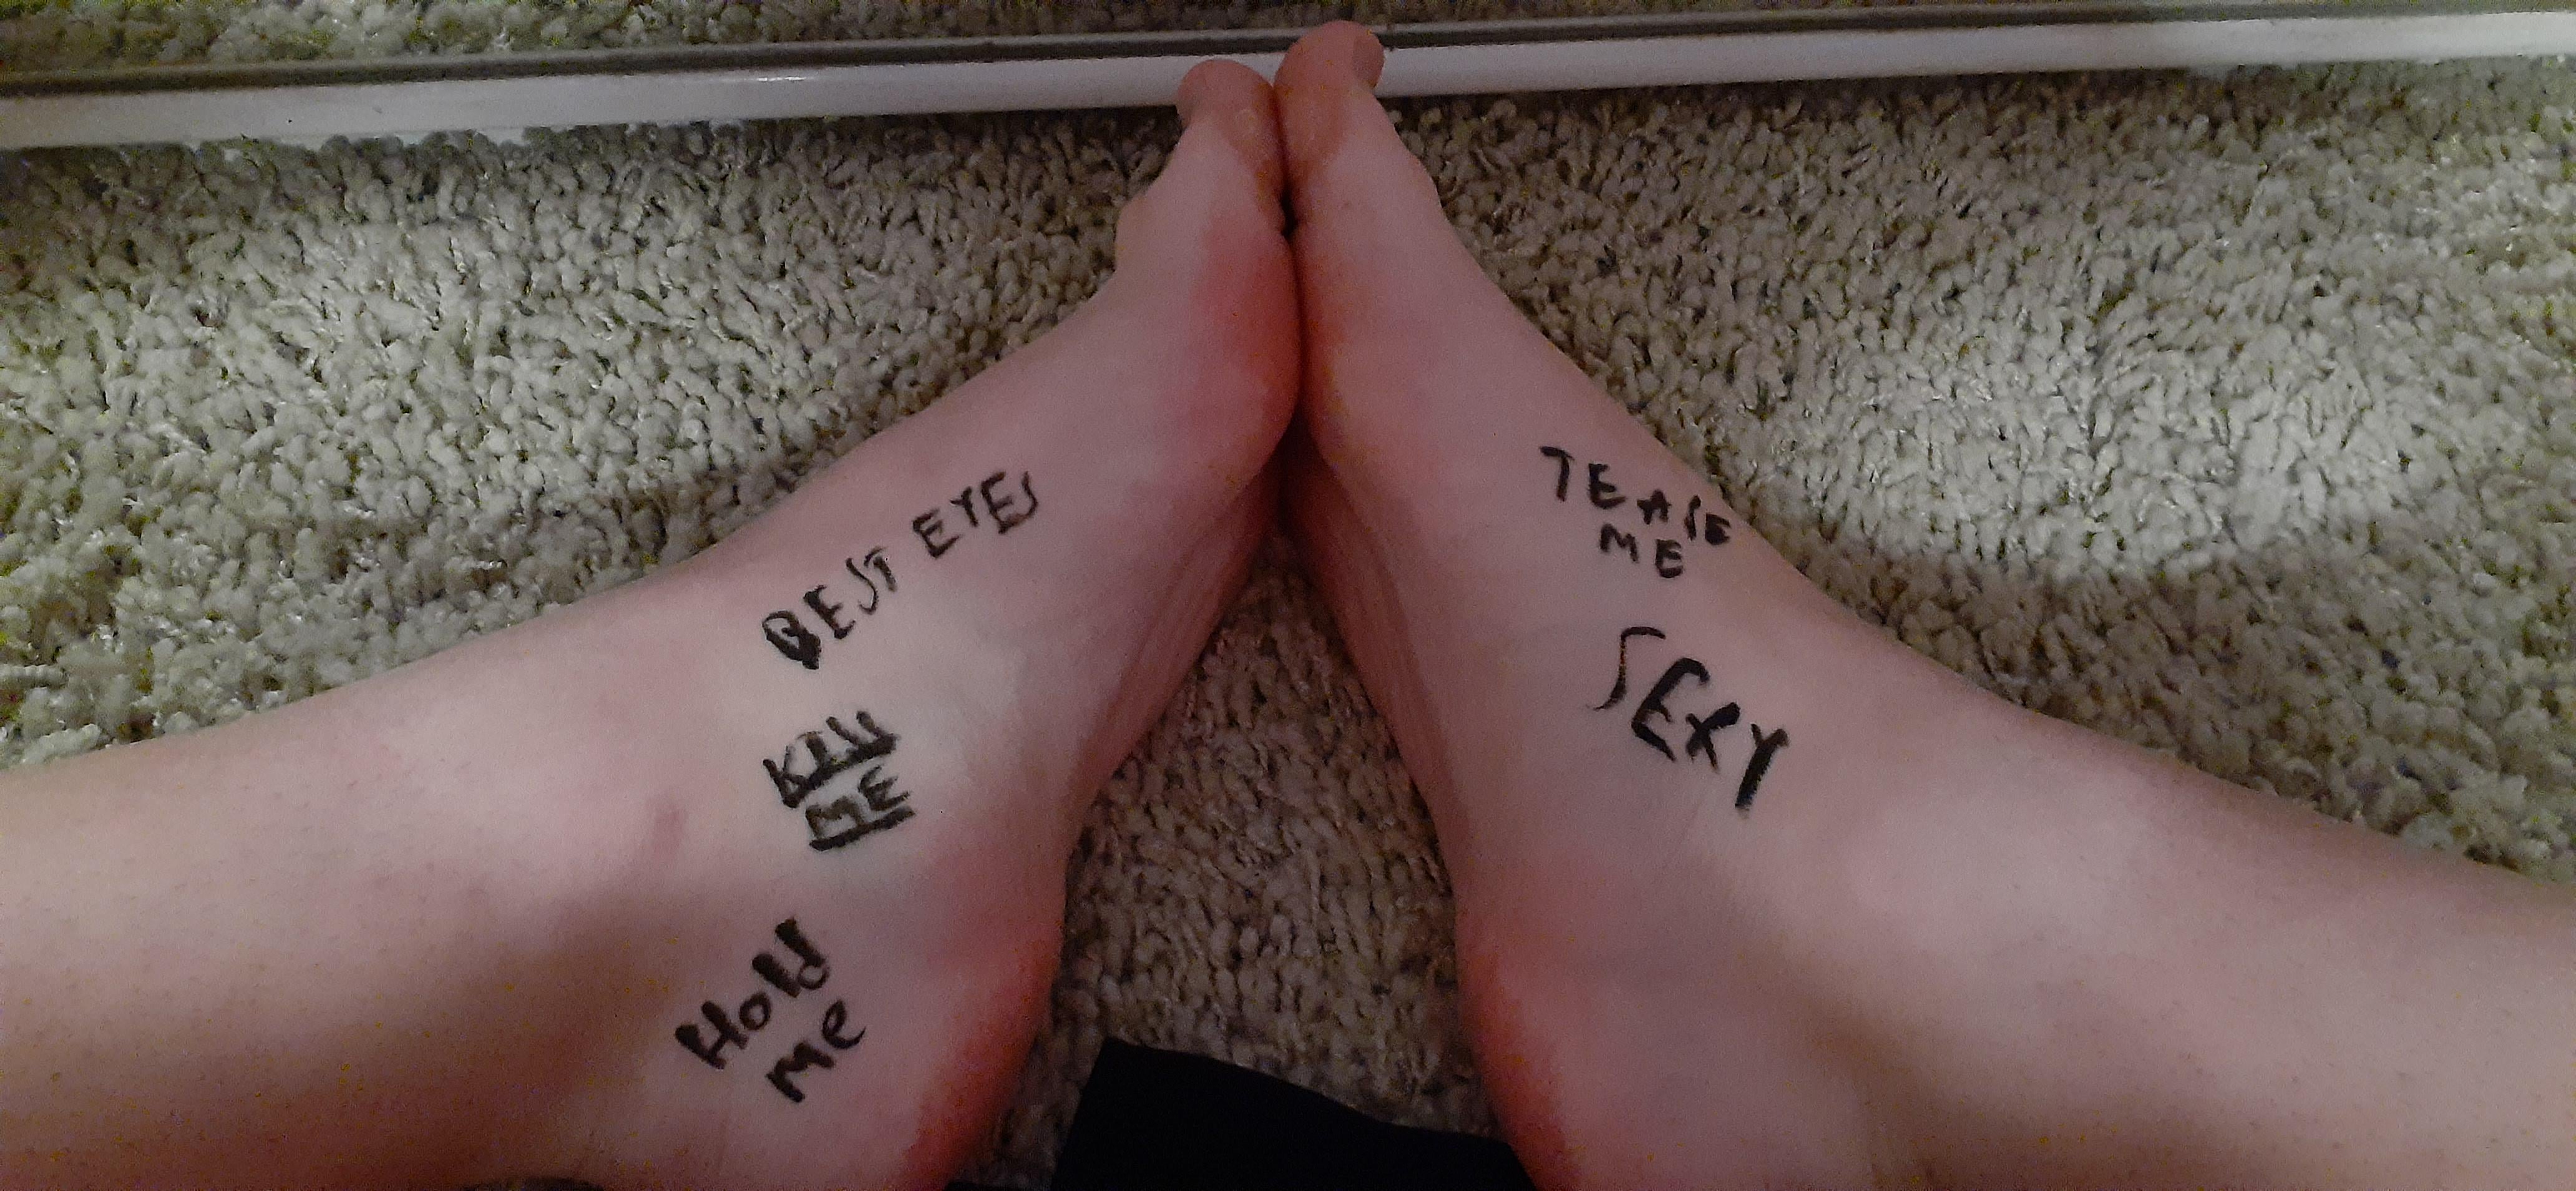 How do you feel about inked up feet